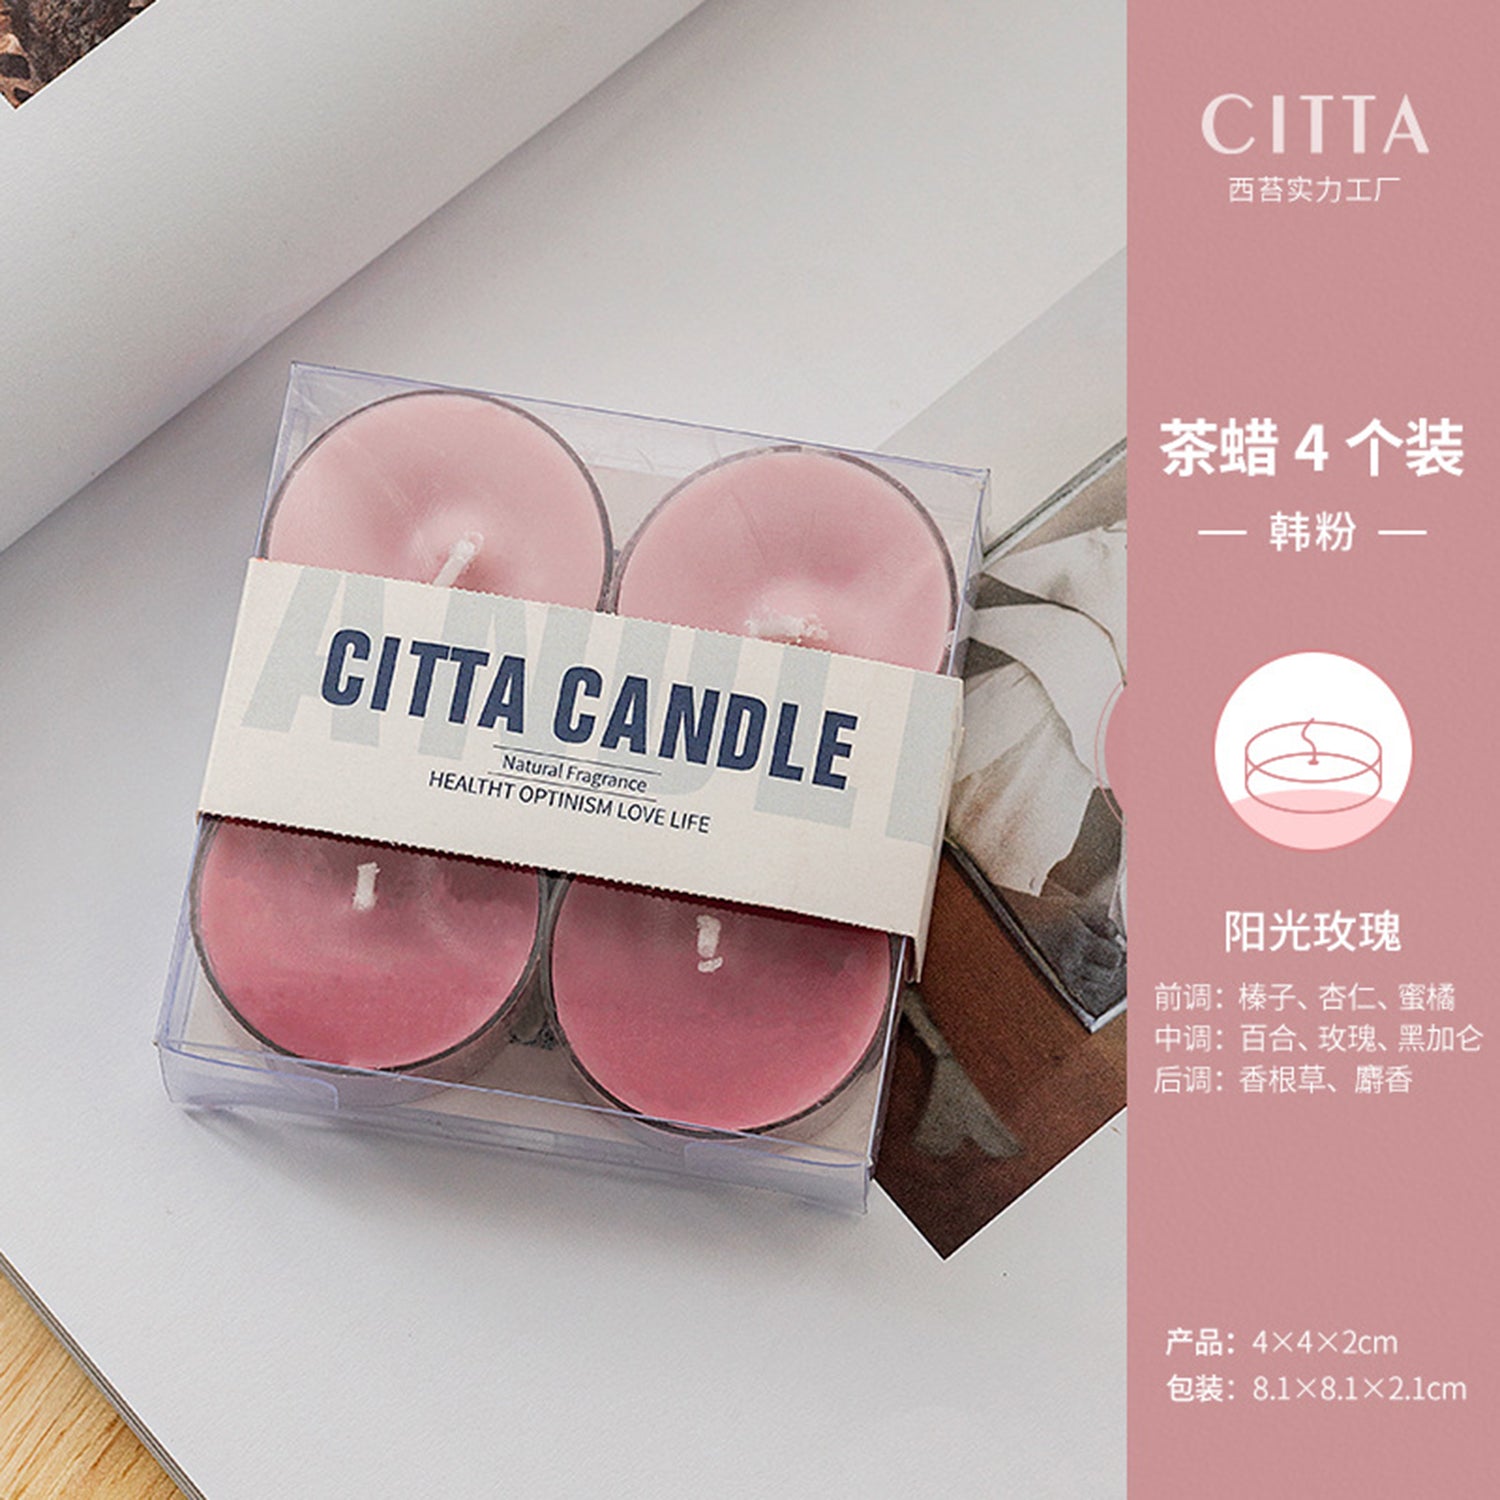 CITTA Elegant Series Scented Candle Aromantic Natural Soy Wax 15G Home Fragrance Aromatherapy (Pack Of 4) Scented Candle CITTA Sunshine Rose 